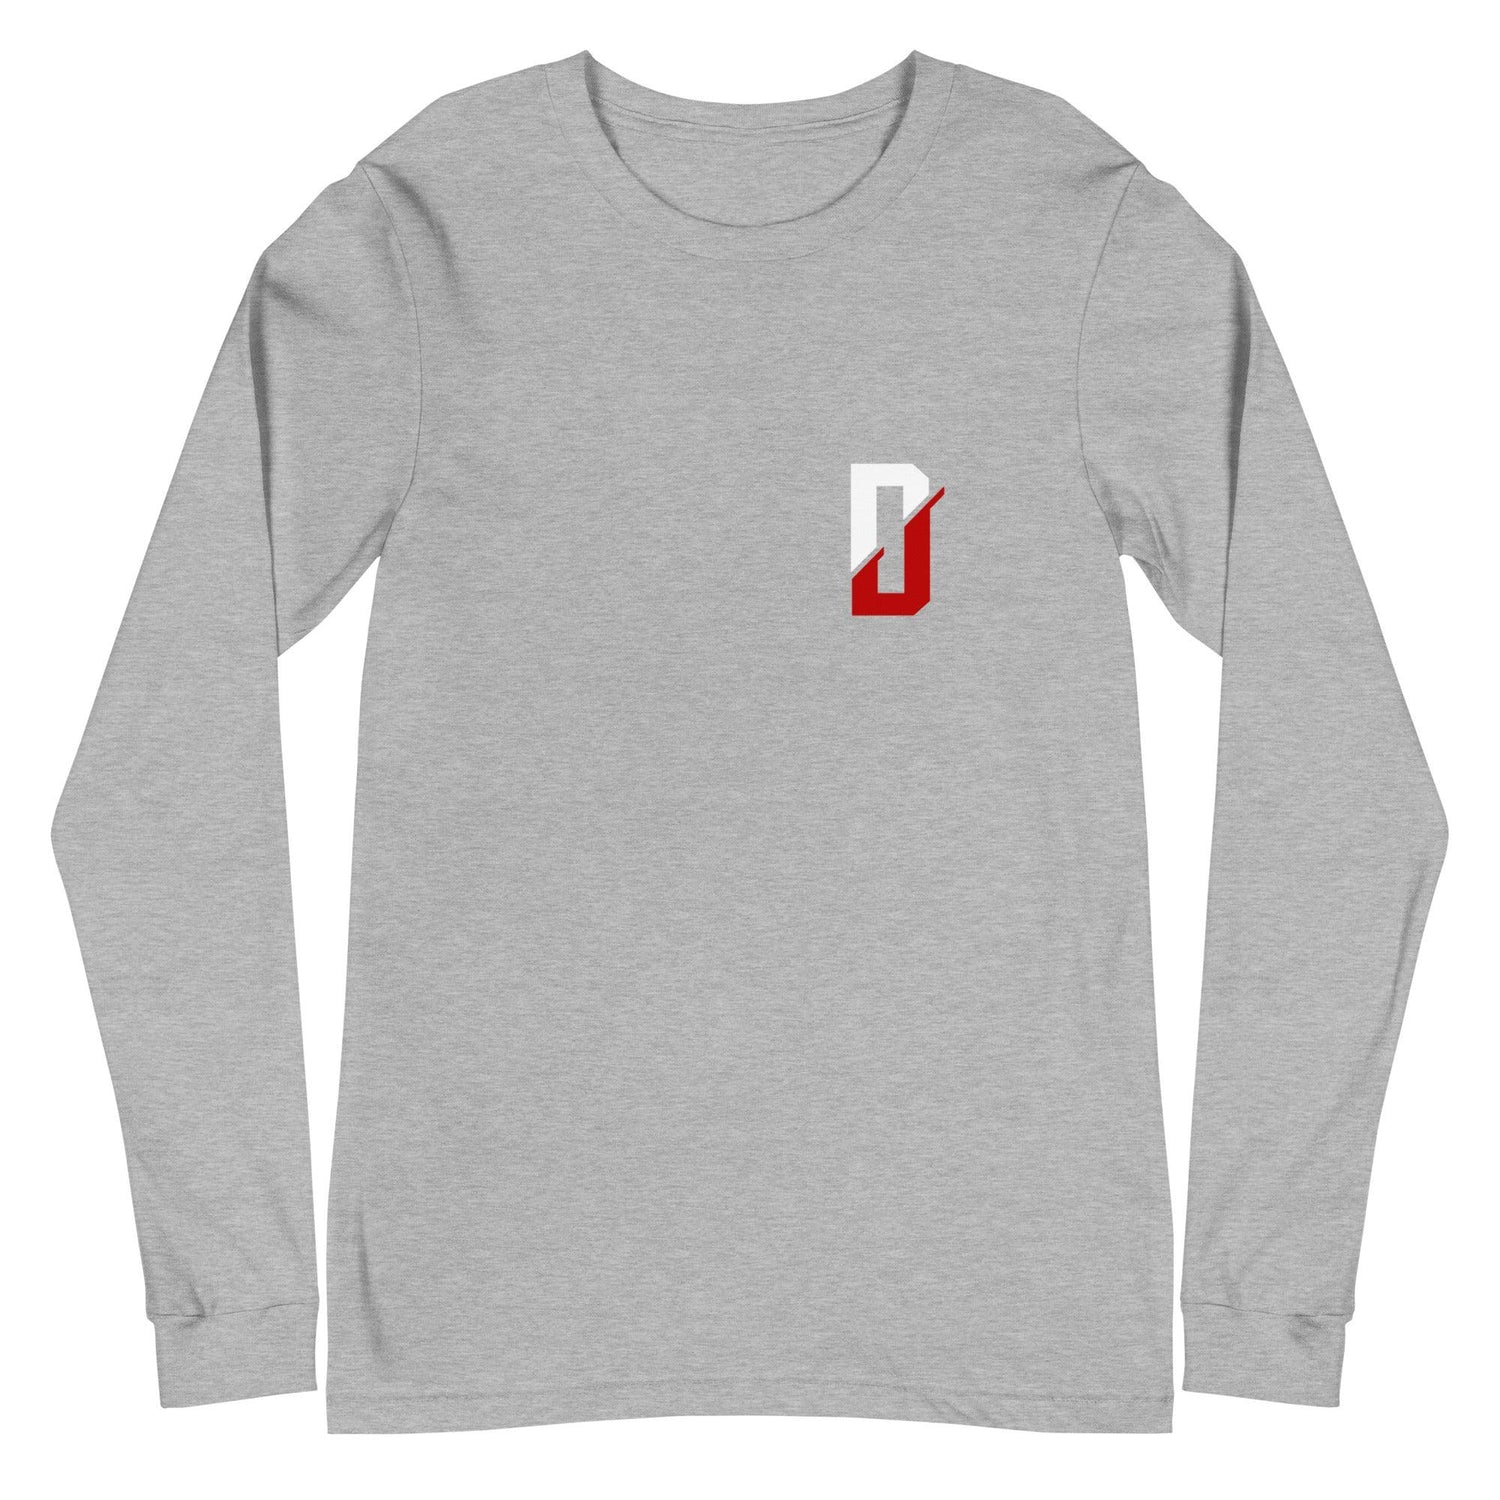 Jay Driver “Signature” Long Sleeve Tee - Fan Arch